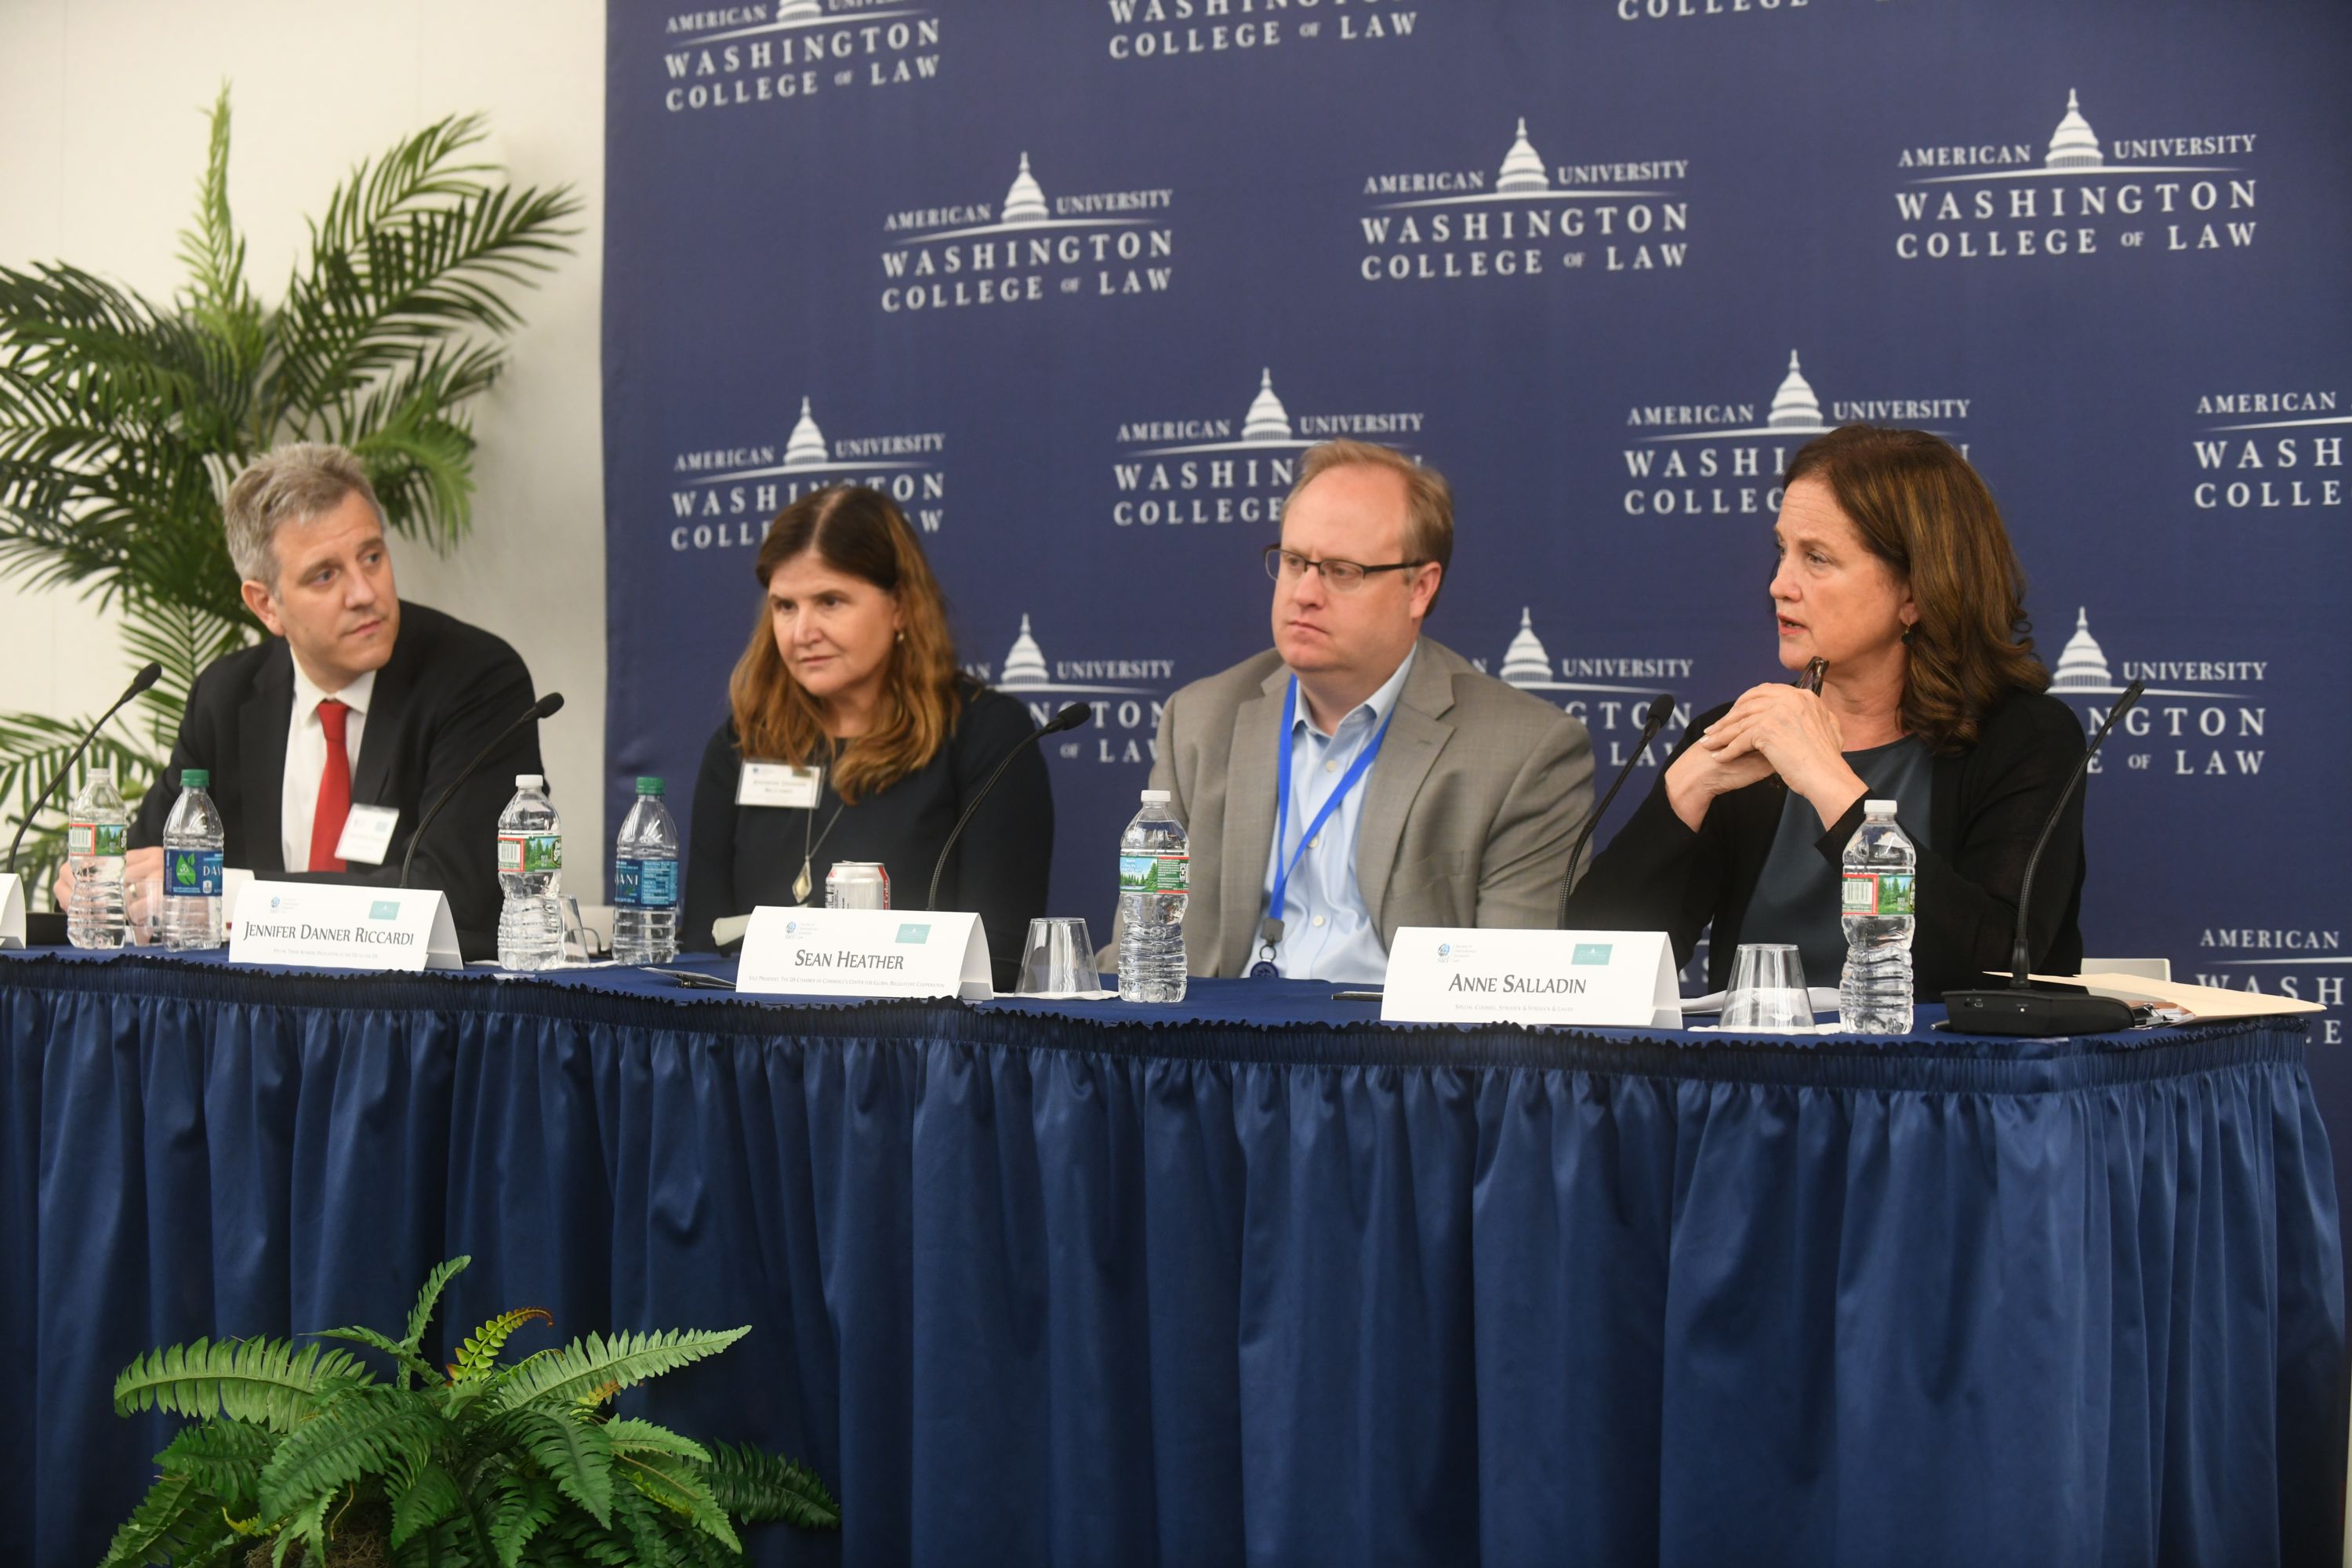 Panel on “A Conversation on Security-Based Investment Restrictions”. Left to right: Christopher Fonzone, Sidley Austin LLP, Jennifer Danner Riccardi, Special Trade Advisor, Delegation of the EU to the United States, Sean Heather, Vice President of the U.S. Chamber of Commerce’s Center for Global Regulatory Cooperation, and Anne Salladin, Special Counsel, Stroock & Stroock & Lavan.